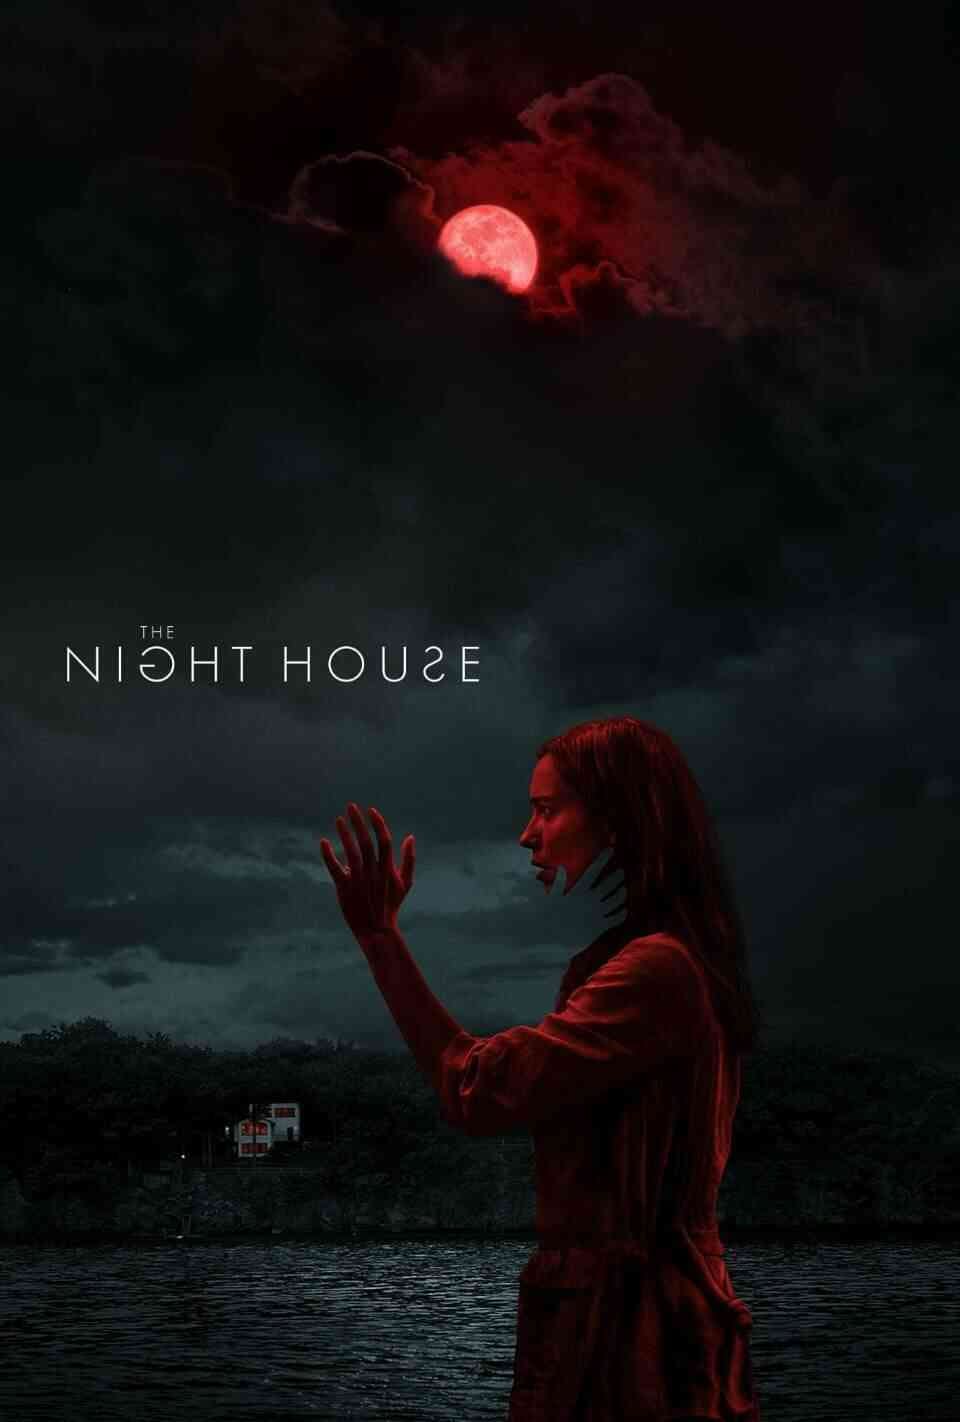 Read The Night House screenplay (poster)